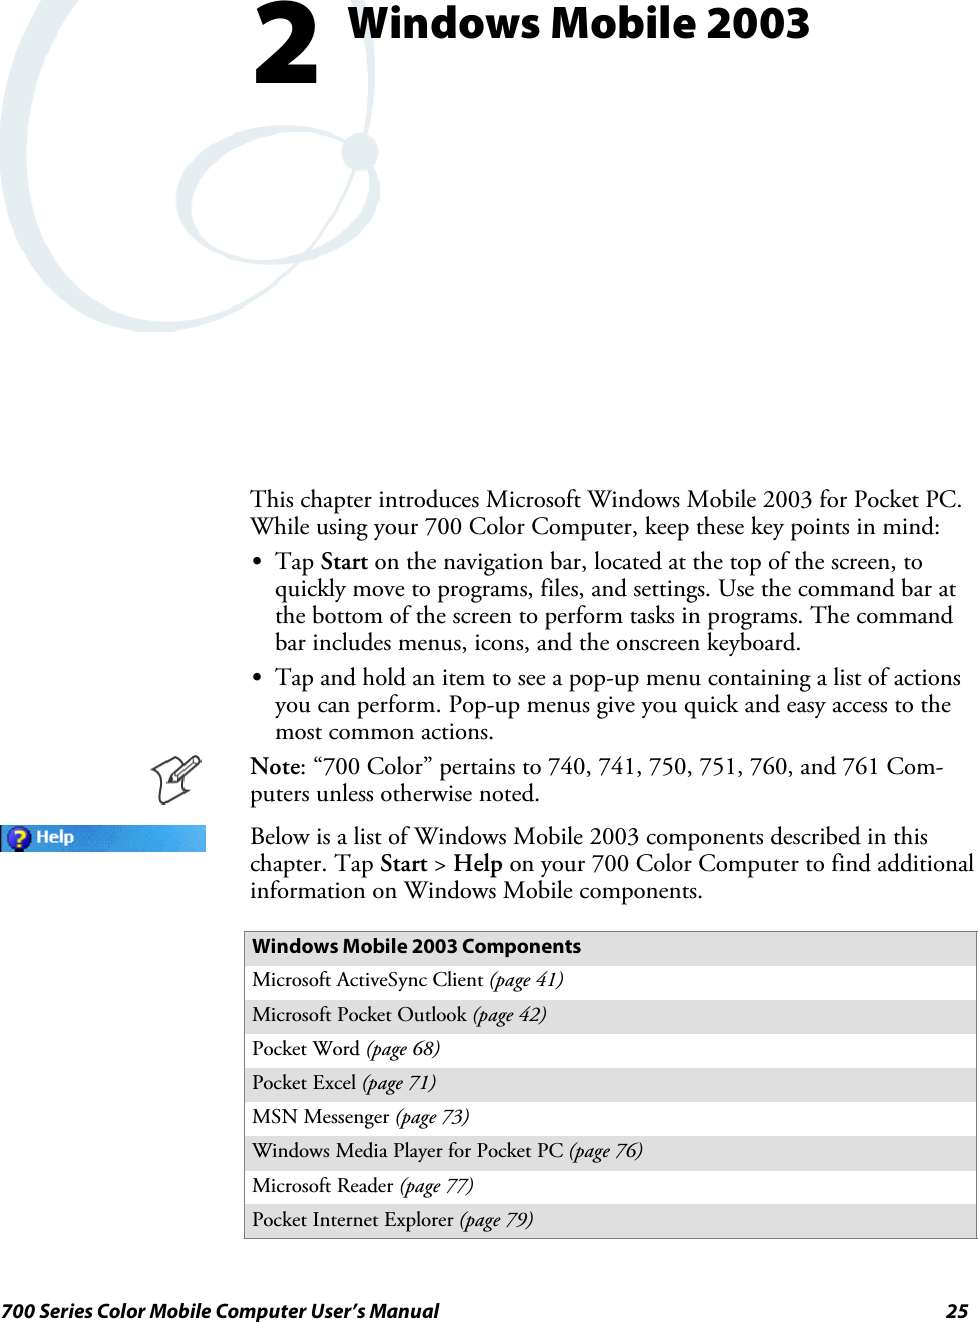 25700 Series Color Mobile Computer User’s ManualWindows Mobile 20032This chapter introduces Microsoft Windows Mobile 2003 for Pocket PC.While using your 700 Color Computer, keep these key points in mind:STap Start on the navigation bar, located at the top of the screen, toquickly move to programs, files, and settings. Use the command bar atthe bottom of the screen to perform tasks in programs. The commandbar includes menus, icons, and the onscreen keyboard.STap and hold an item to see a pop-up menu containing a list of actionsyou can perform. Pop-up menus give you quick and easy access to themost common actions.Note: “700 Color” pertains to 740, 741, 750, 751, 760, and 761 Com-puters unless otherwise noted.Below is a list of Windows Mobile 2003 components described in thischapter. Tap Start &gt;Help on your 700 Color Computer to find additionalinformation on Windows Mobile components.Windows Mobile 2003 ComponentsMicrosoft ActiveSync Client (page 41)Microsoft Pocket Outlook (page 42)Pocket Word (page 68)Pocket Excel (page 71)MSN Messenger (page 73)Windows Media Player for Pocket PC (page 76)Microsoft Reader (page 77)Pocket Internet Explorer (page 79)